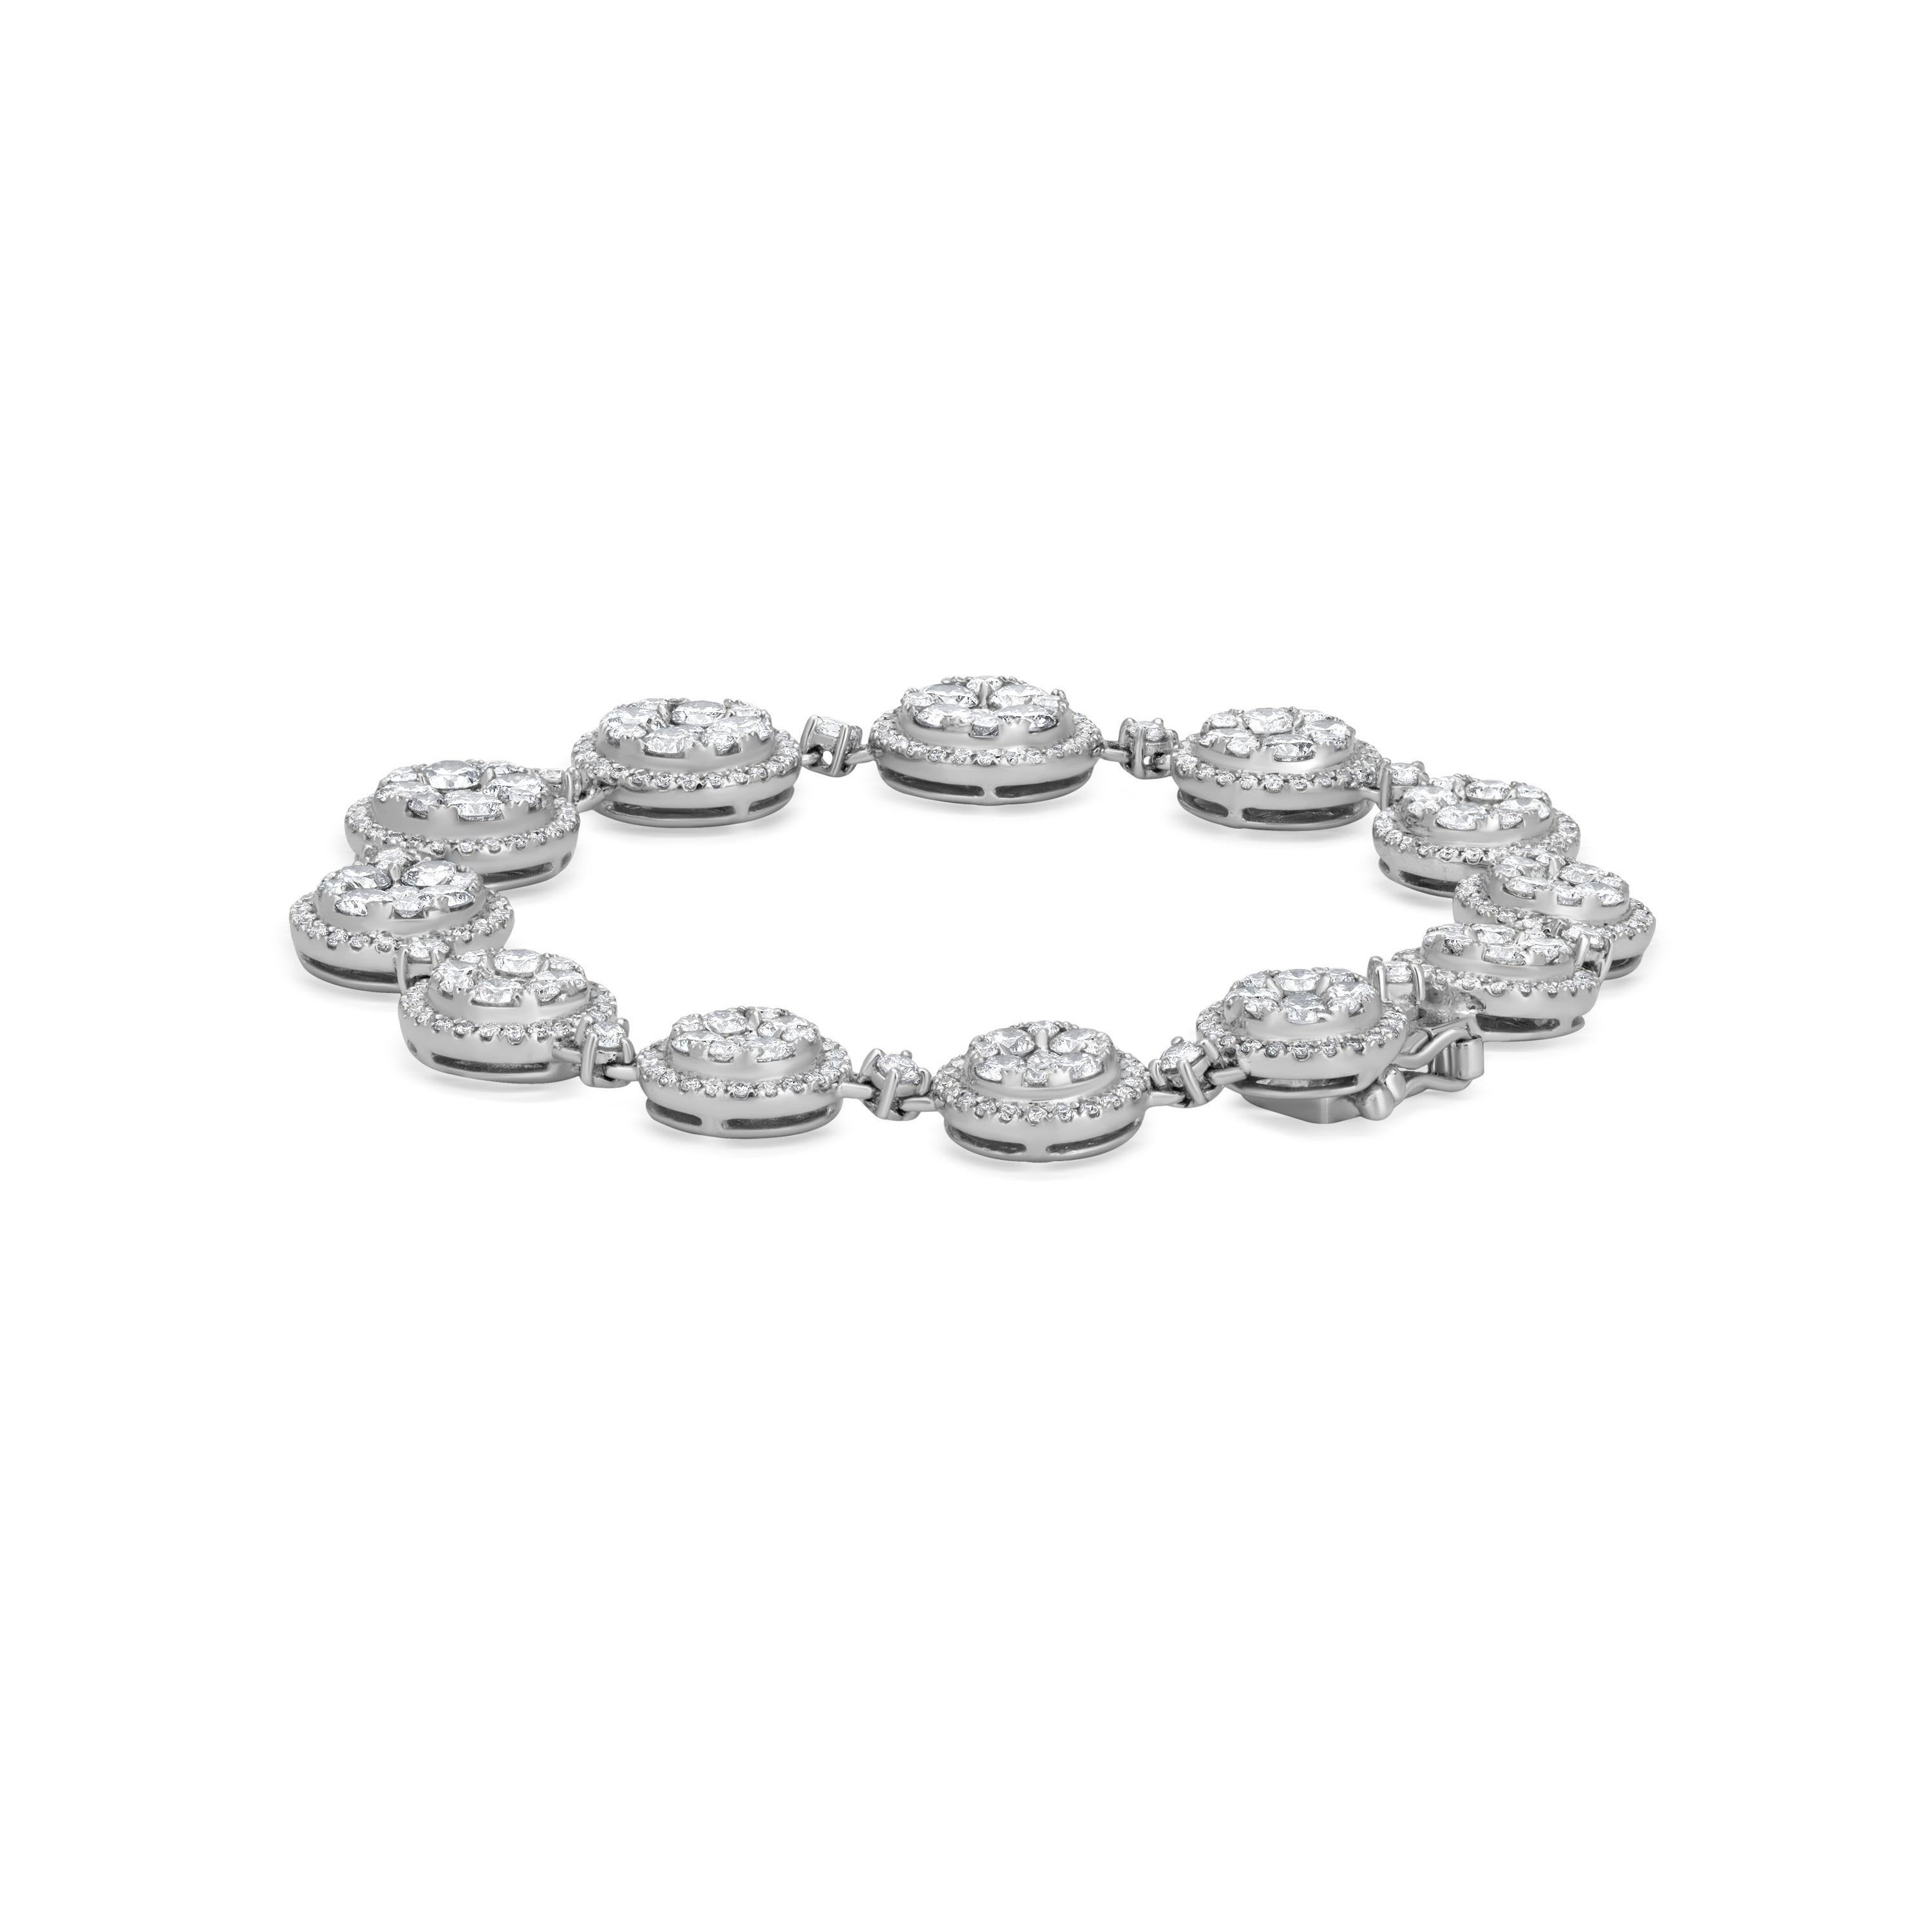 The Nigaam 6.81 Cttw. Diamond Circle Bracelet is a breathtaking piece of jewelry crafted in 18K white gold. The double latch circle design consists of symmetrical, diamond-studded circles connected to each other, making it a classic and timeless